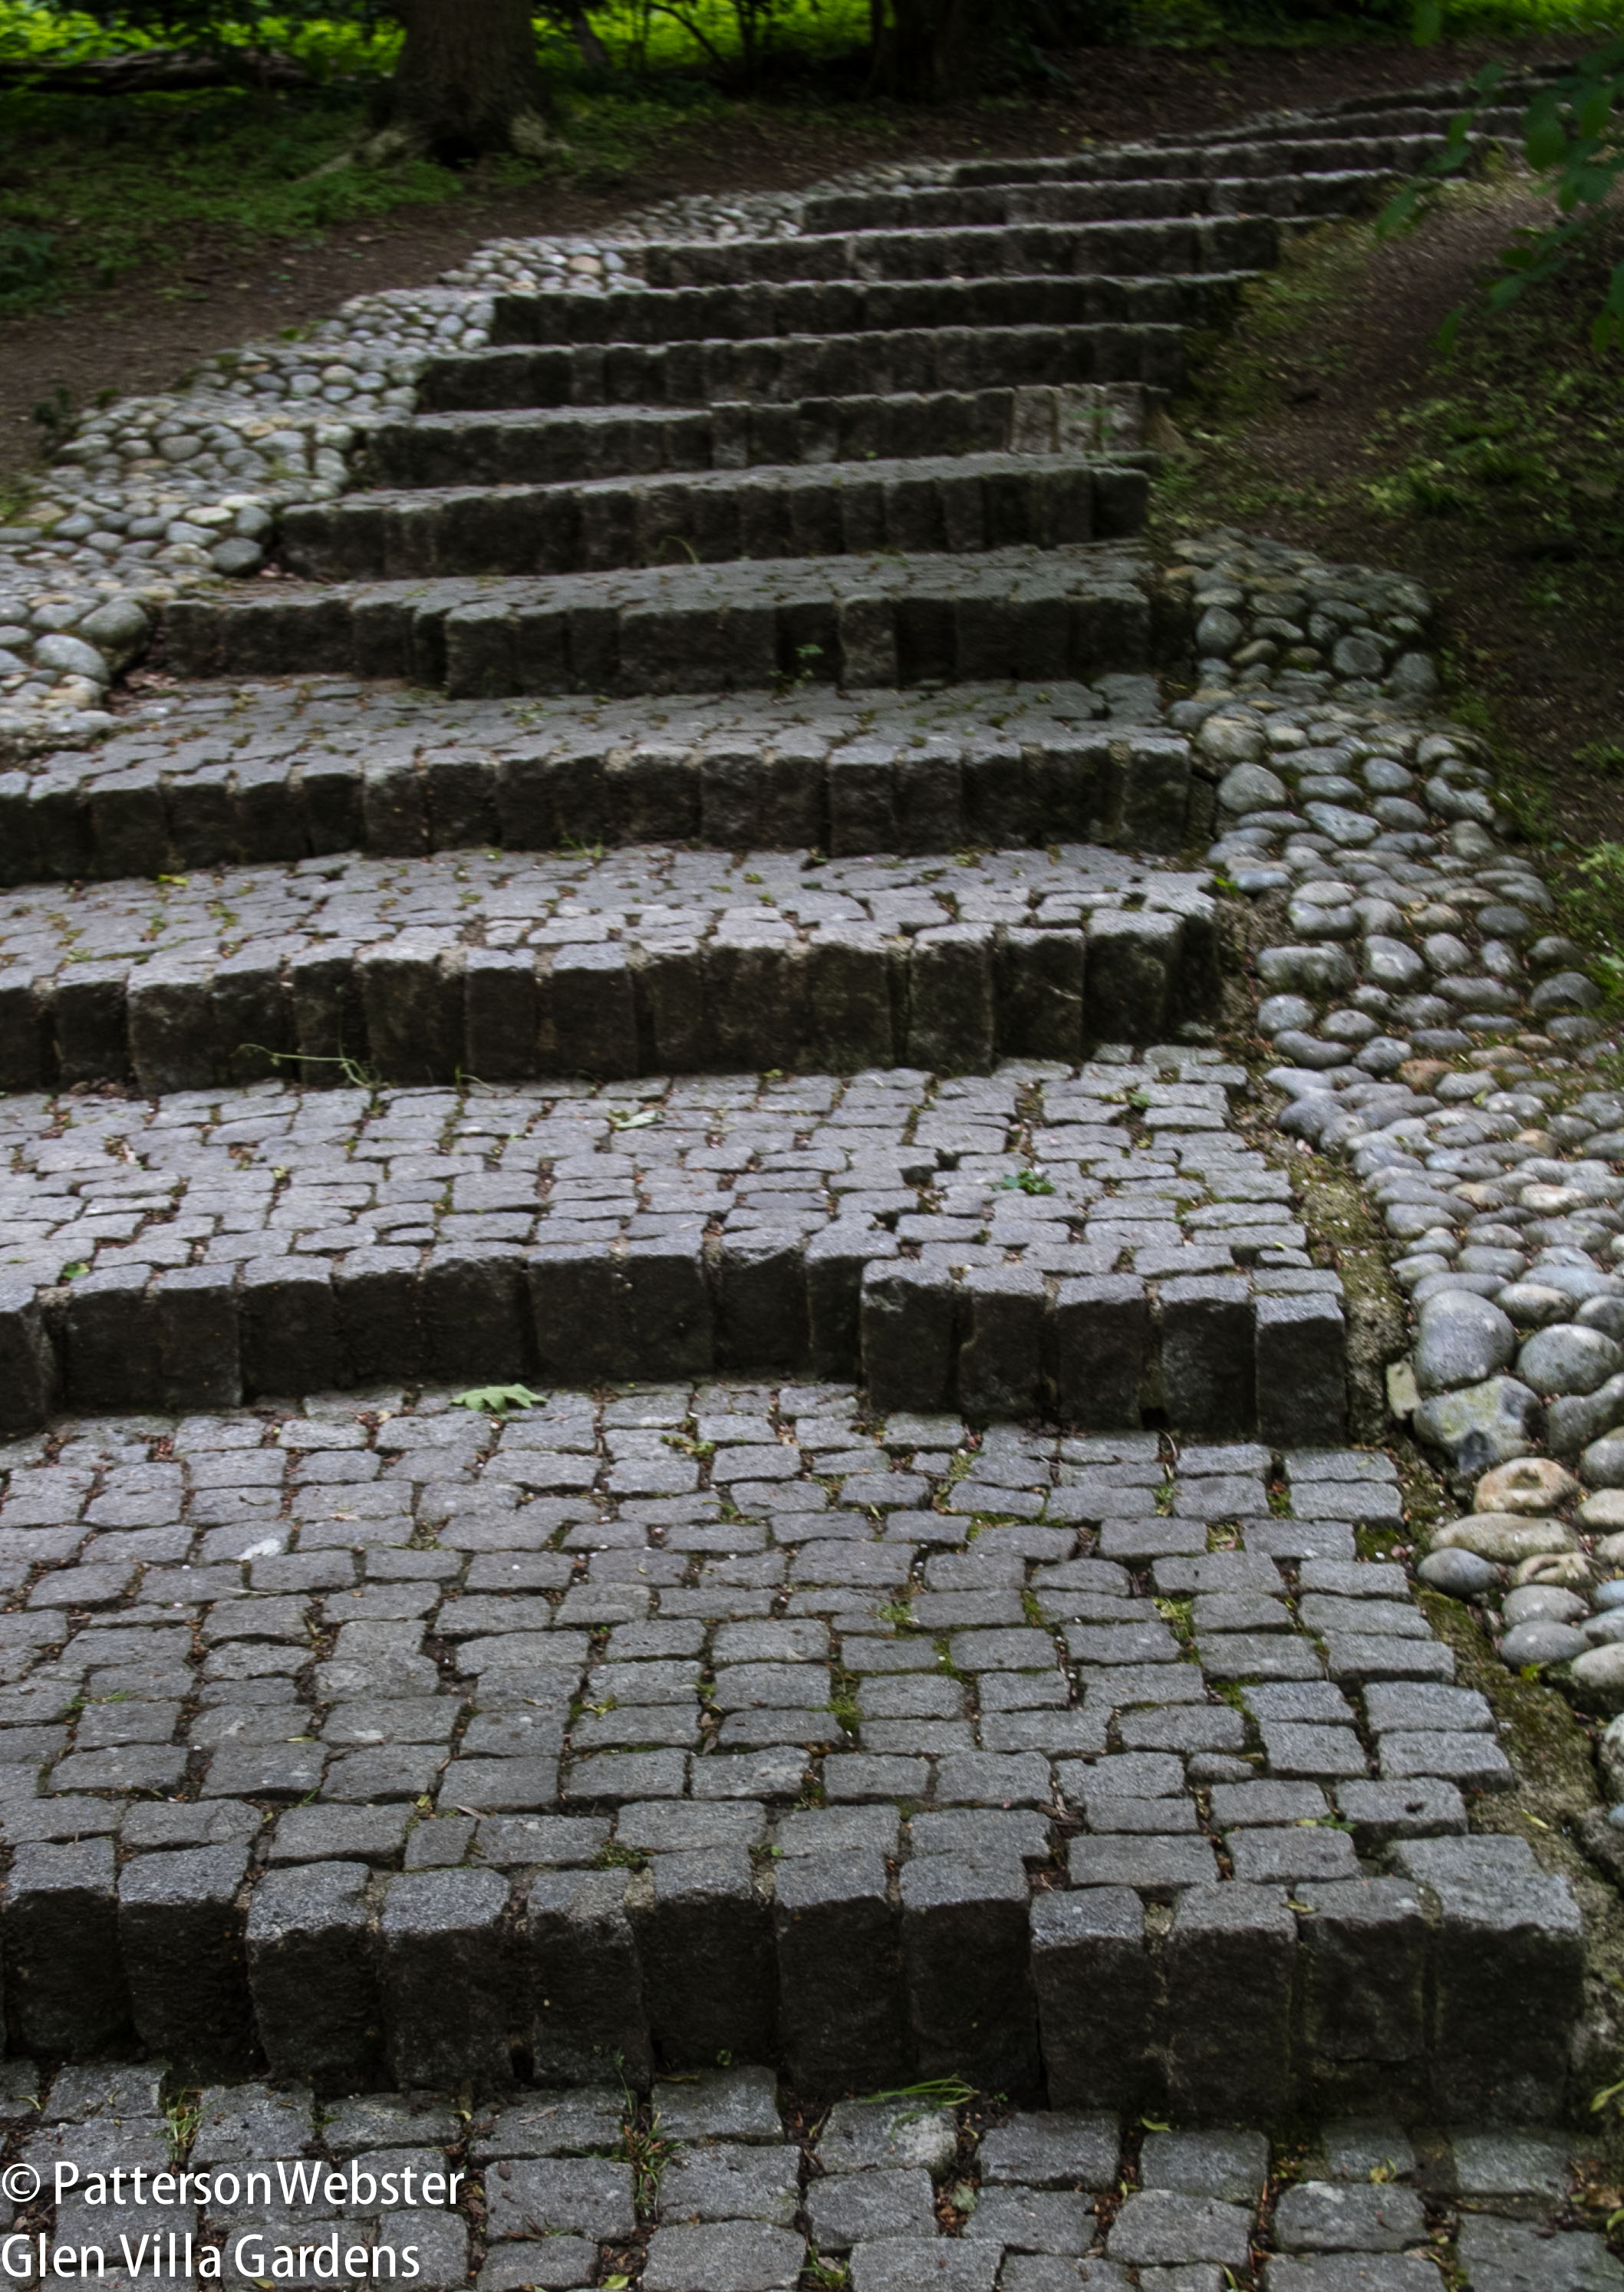 The front edge of each step is uneven. Each step is different, and each sett is unlike the others. 